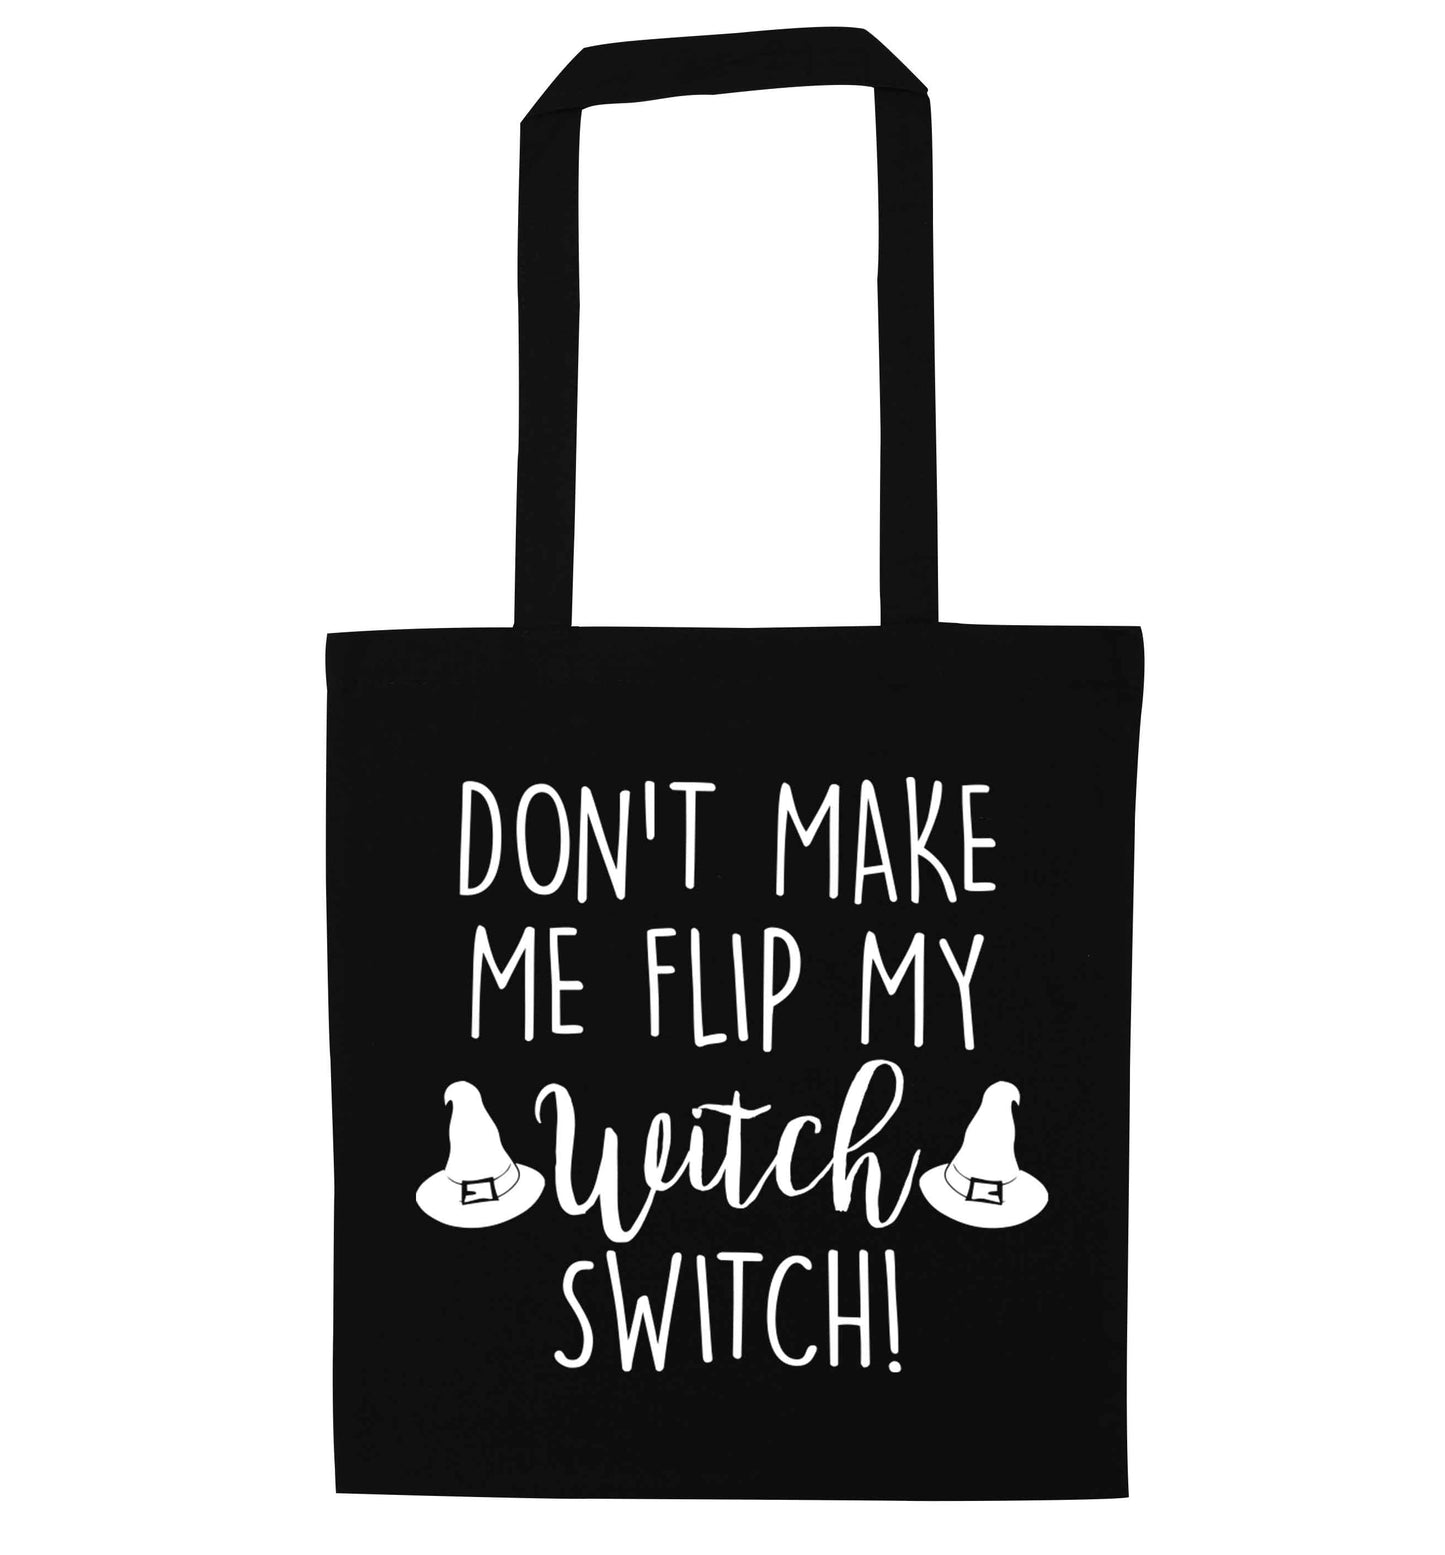 Don't make me flip my witch switch black tote bag